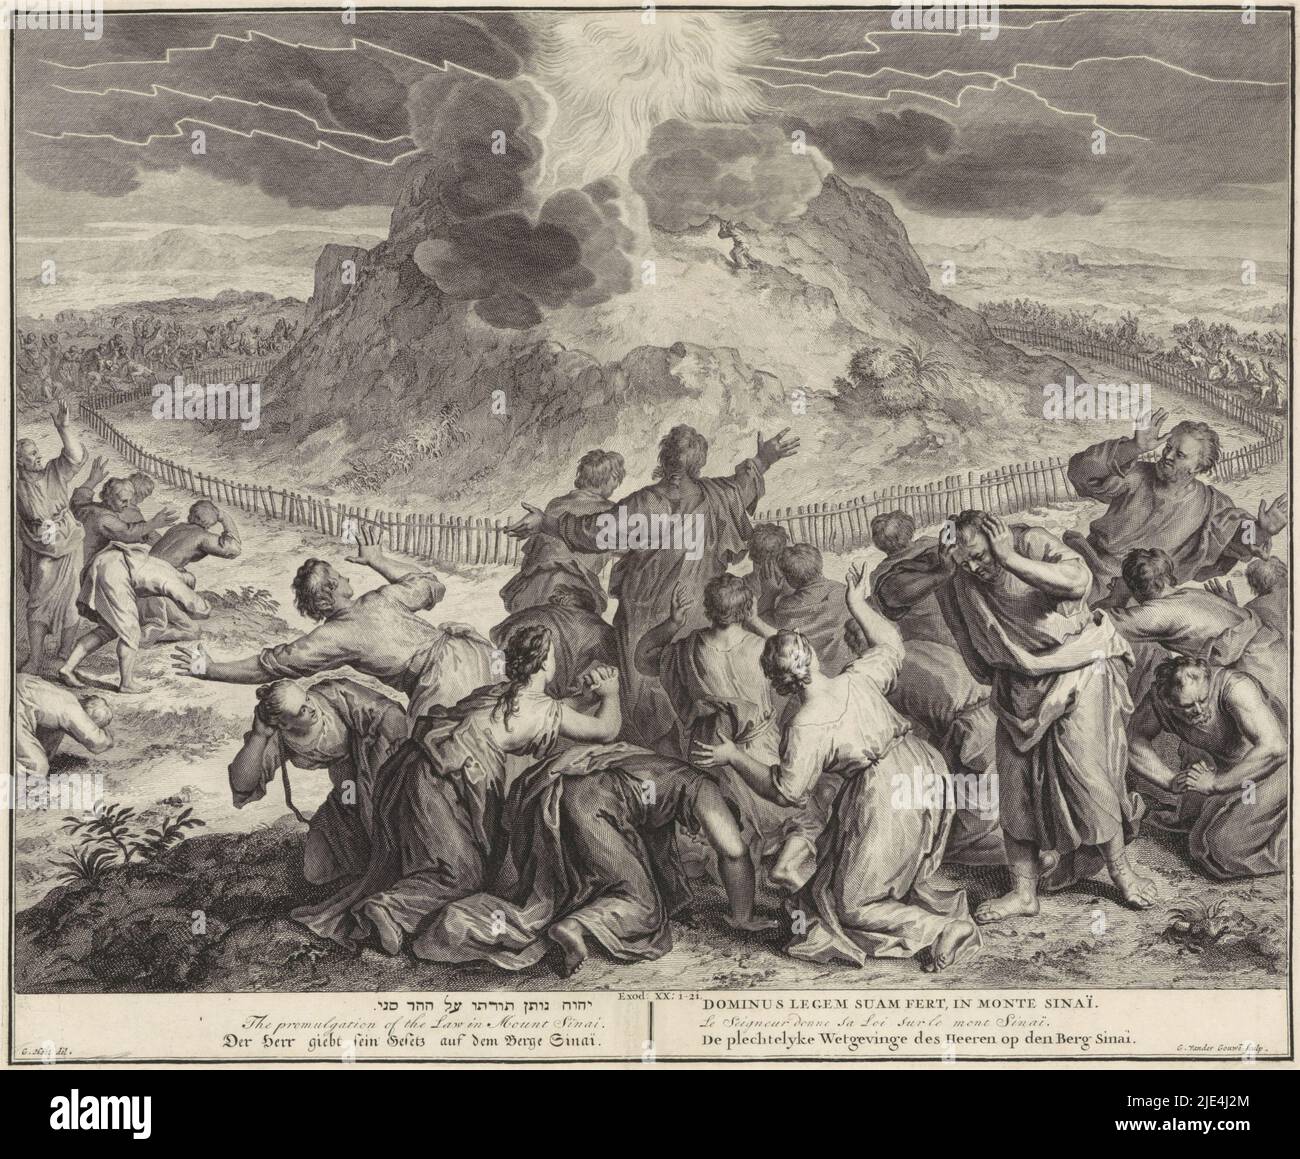 Moses on Mount Sinai, Gilliam van der Gouwen, after Gerard Hoet (I), 1728, Moses speaking to God on Mount Sinai. The Jewish people in the foreground panic at hearing thunders and seeing flashes of light and smoke coming from the mountain (Ex. 20:21). The print has a Hebrew, Latin, French, English, German and Dutch caption., print maker: Gilliam van der Gouwen, (mentioned on object), intermediary draughtsman: Gerard Hoet (I), (mentioned on object), publisher: Pieter de Hondt, print maker: Amsterdam, publisher: The Hague, 1728, paper, etching, engraving, w 425 mm × h 353 mm Stock Photo